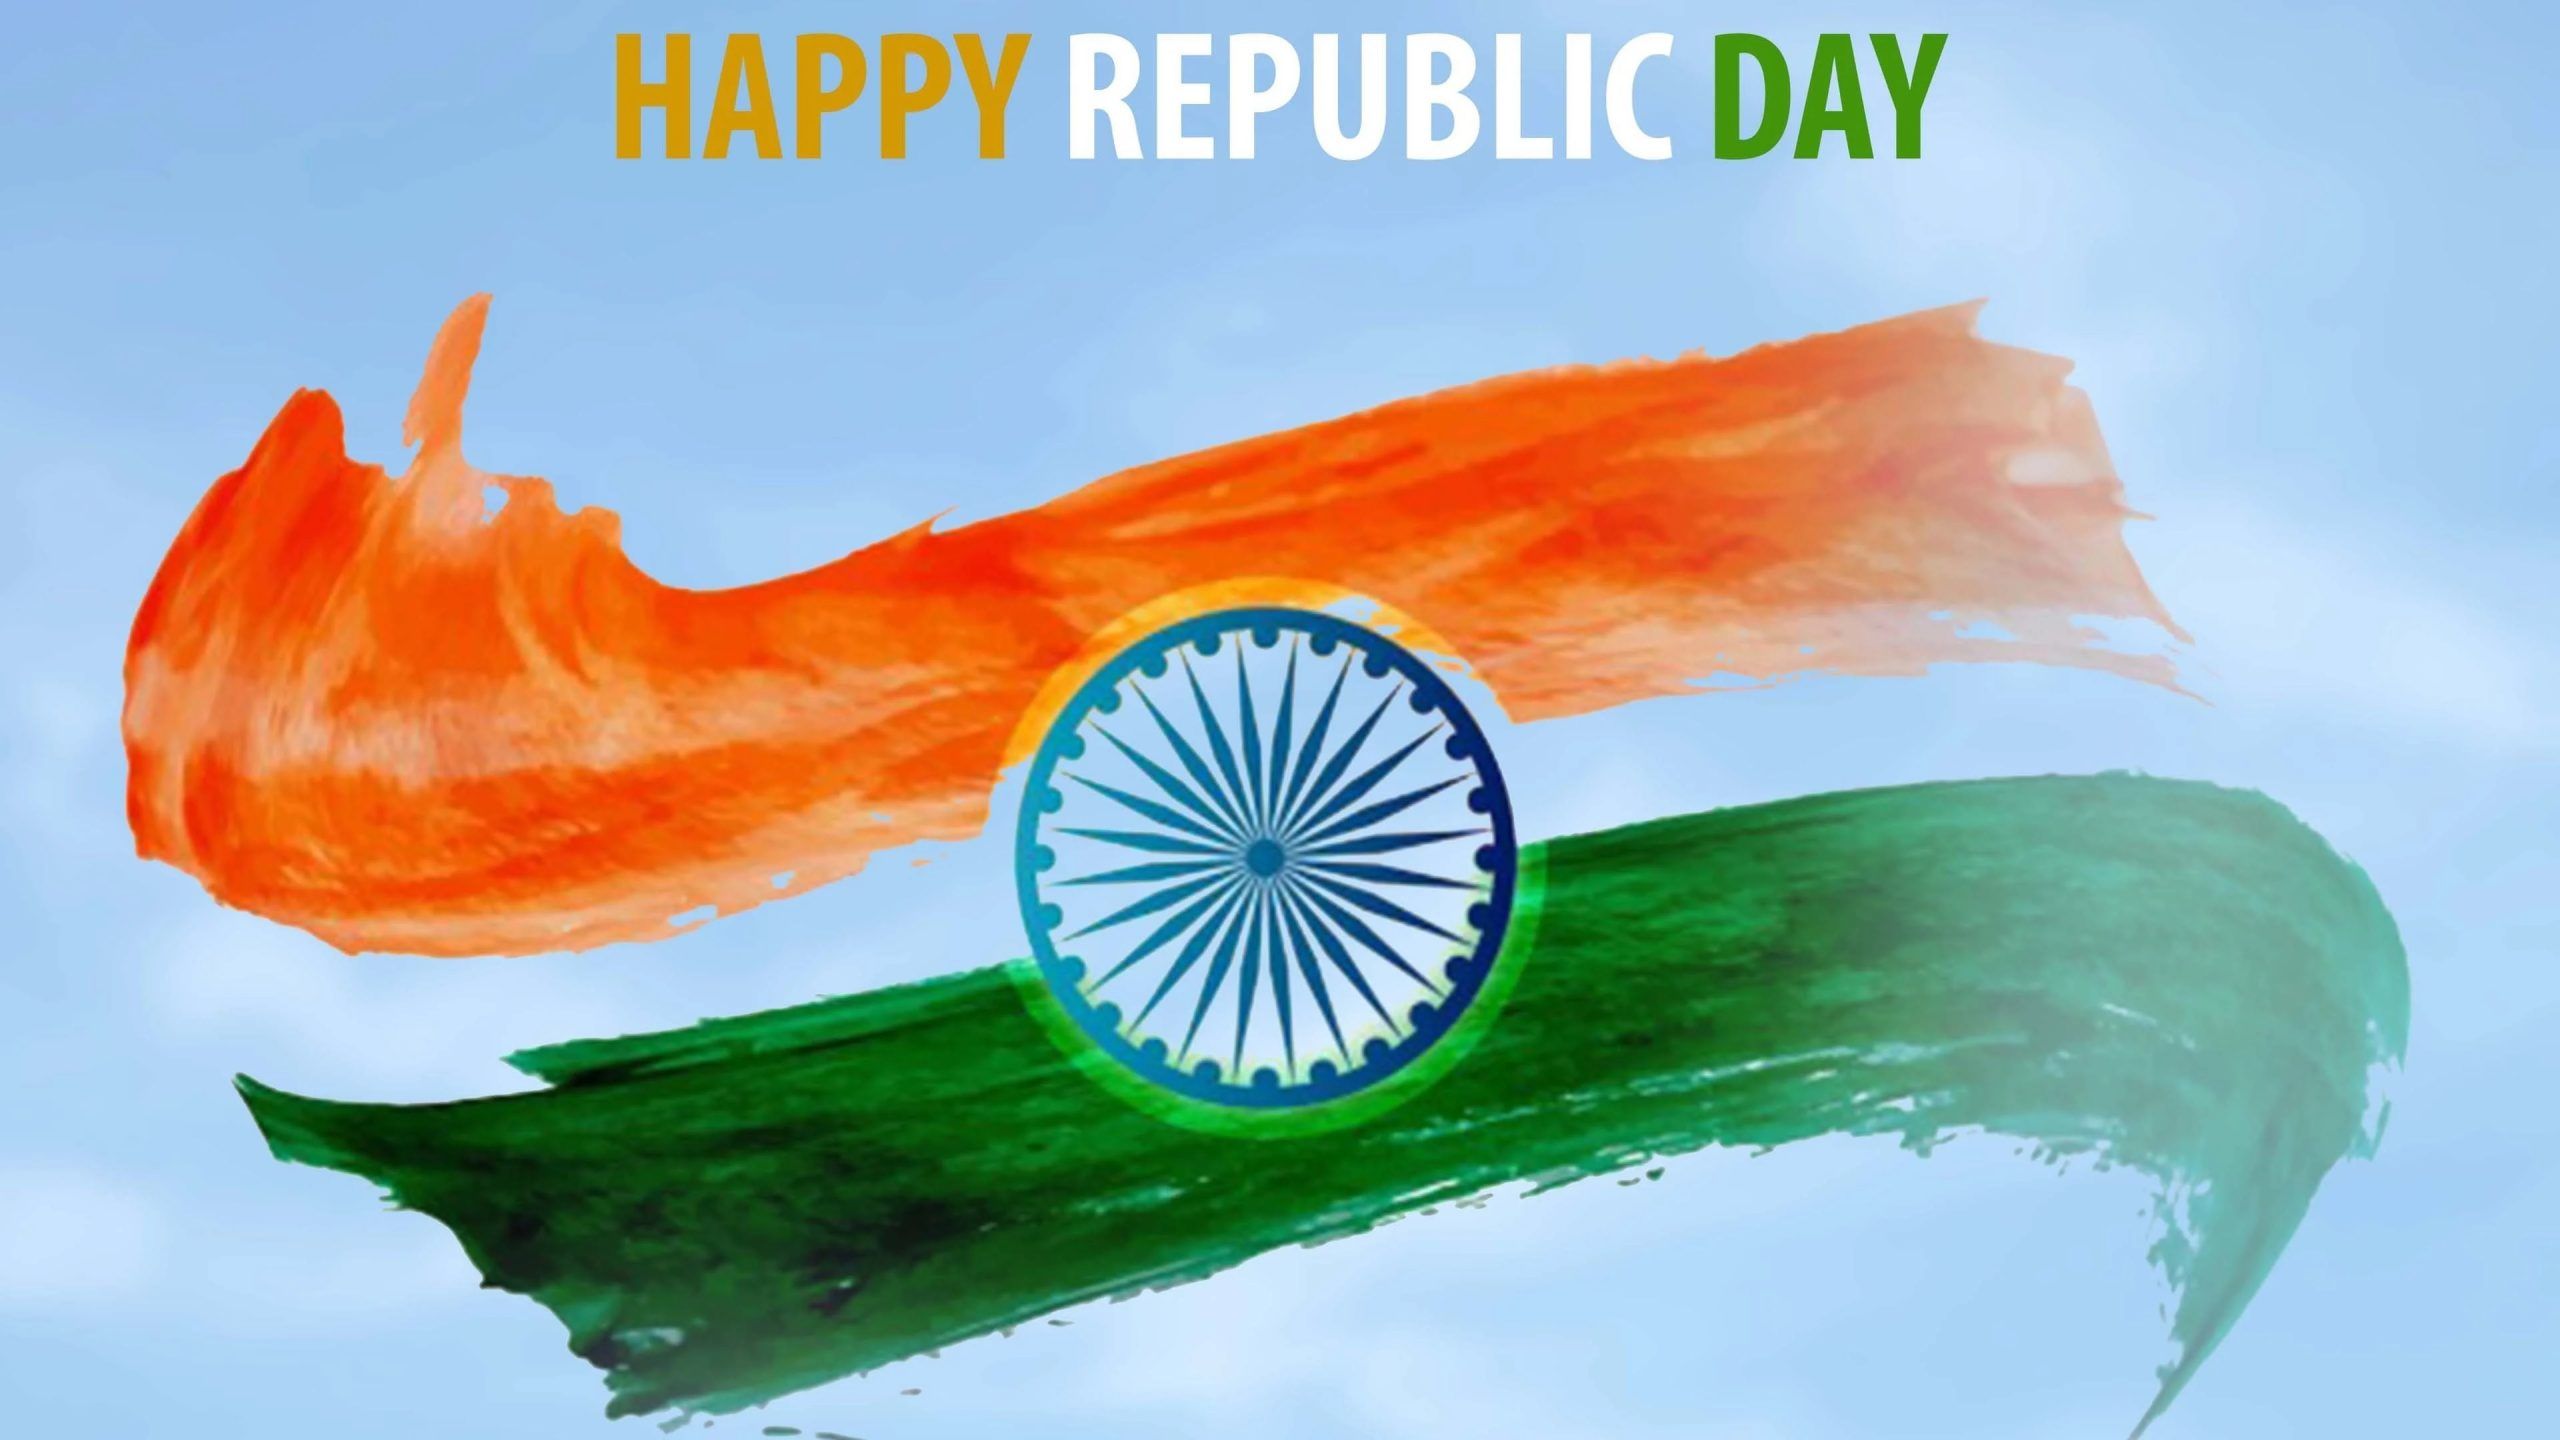 2021} India Republic Day HD Wallpaper, Image - [Free Download]